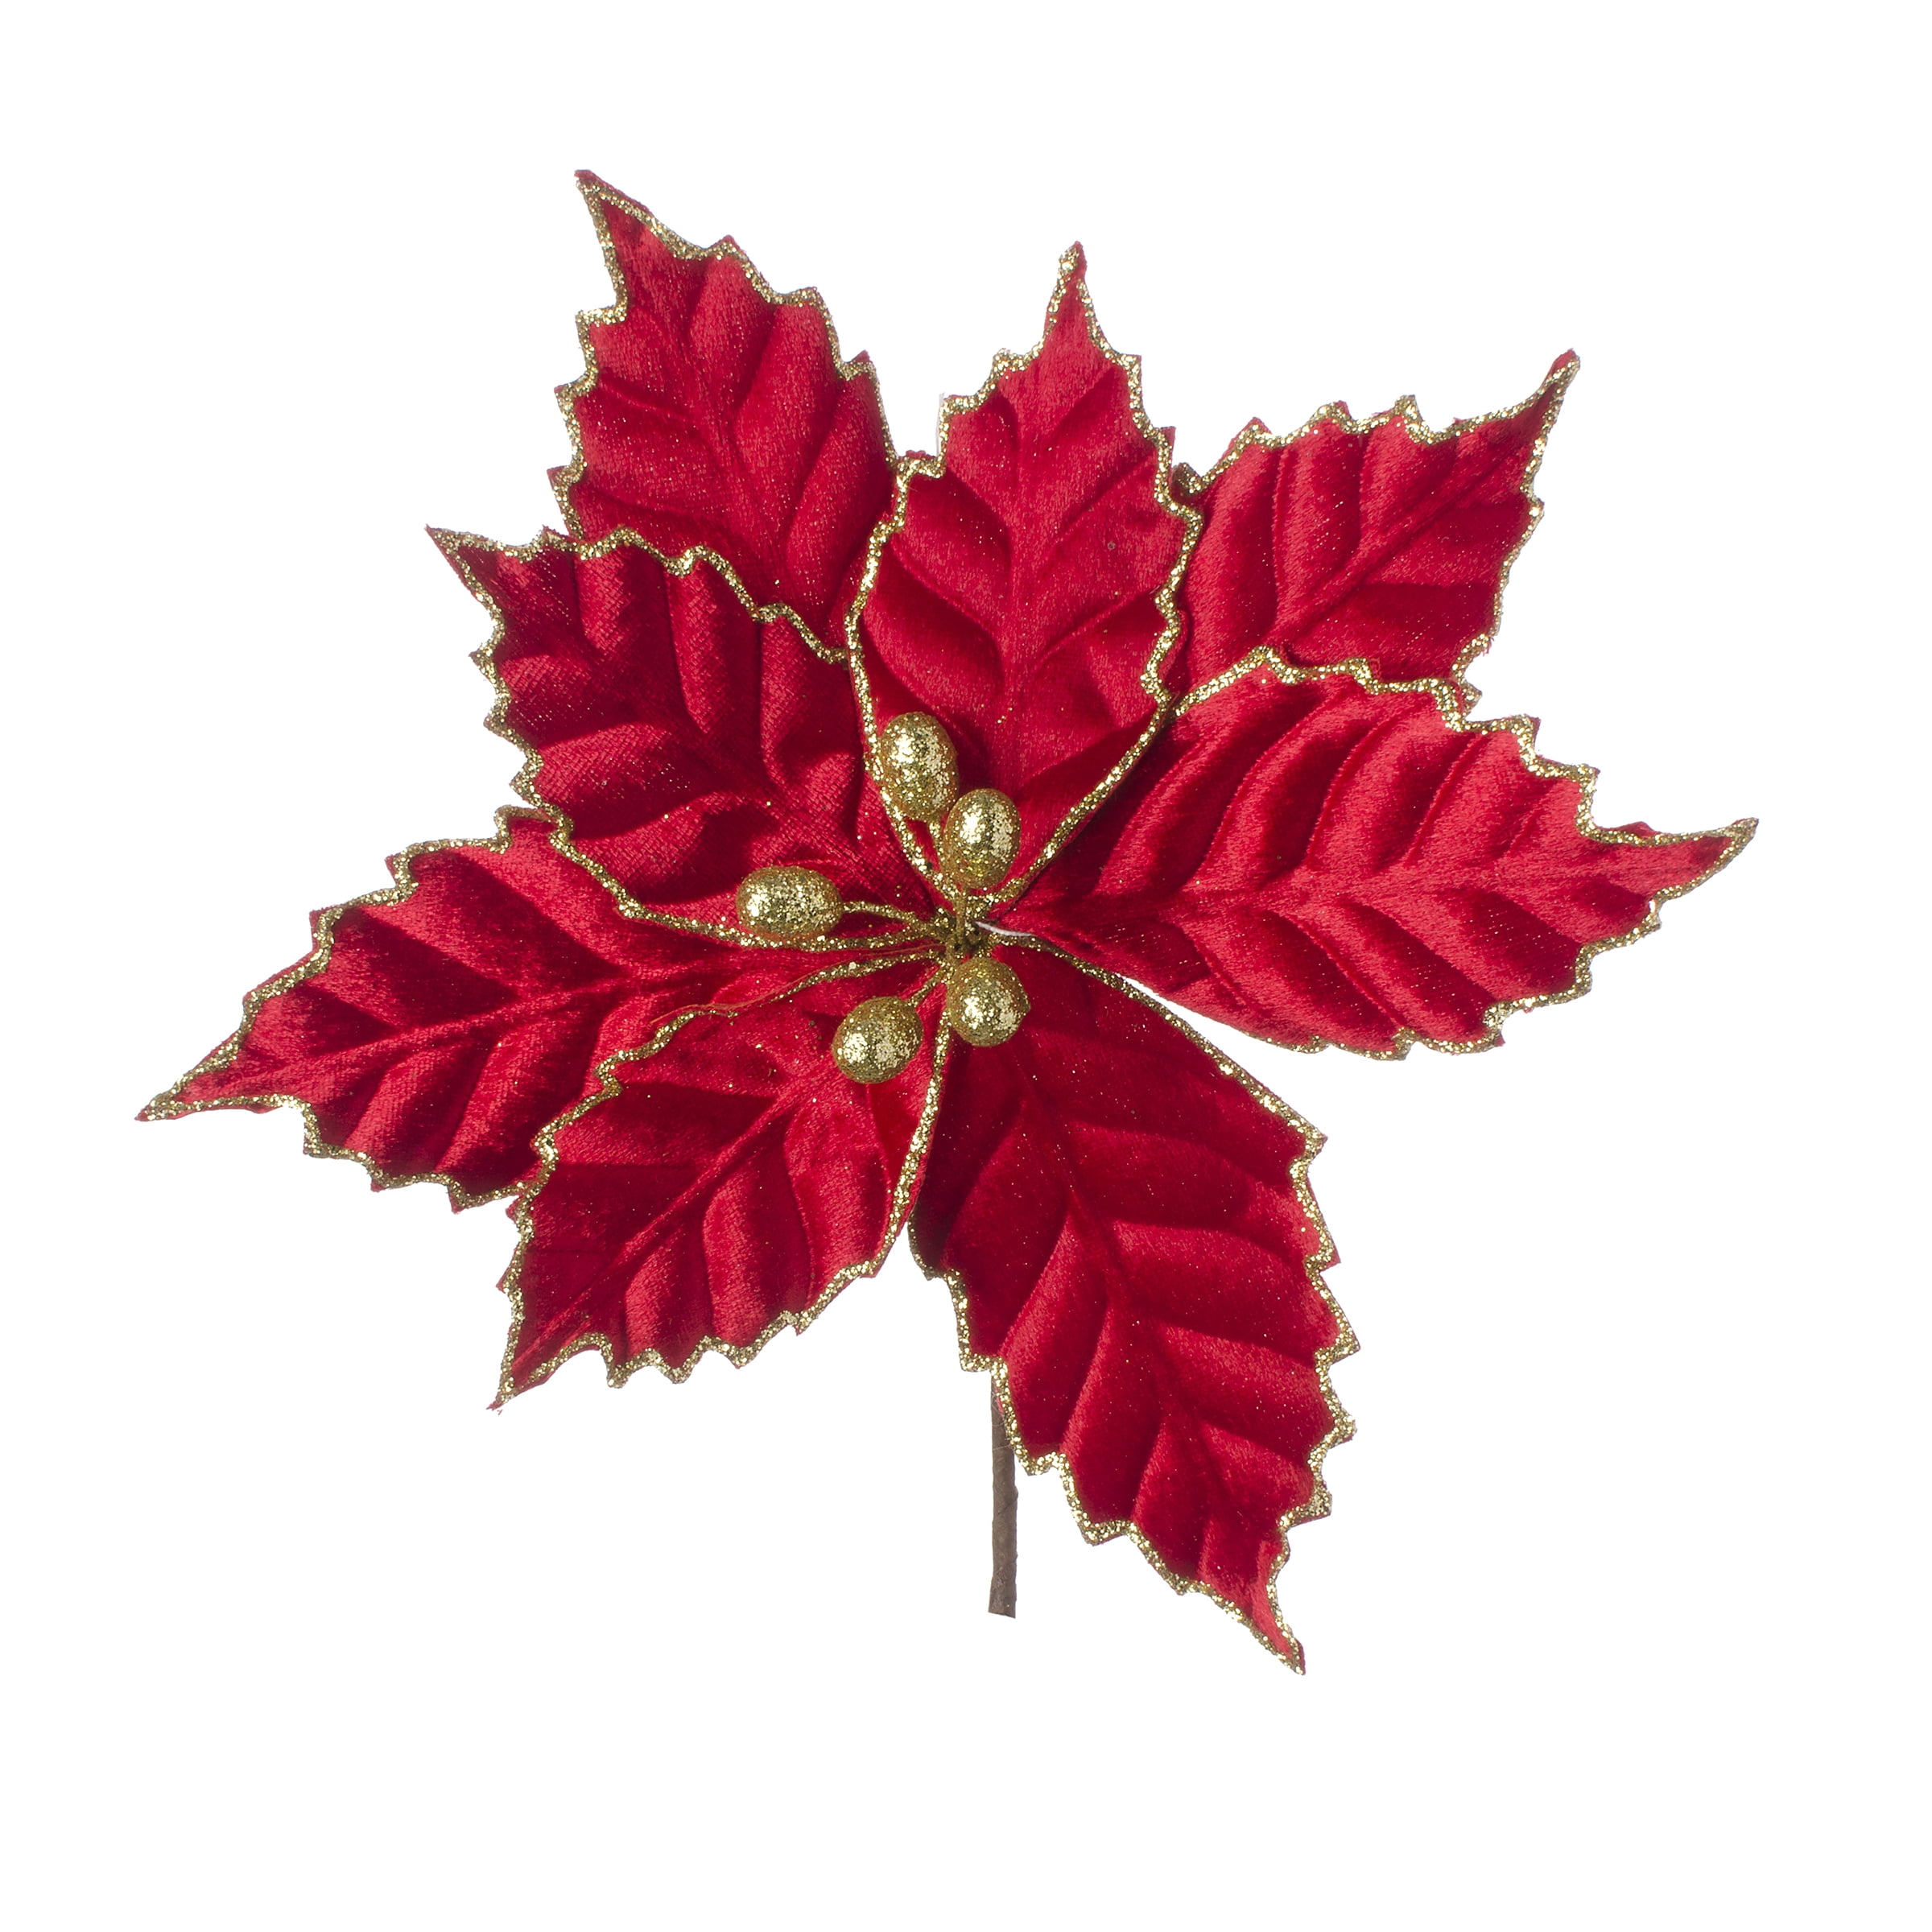 Darice Christmas Poinsettia Pick Red 9 x 12 inches w 